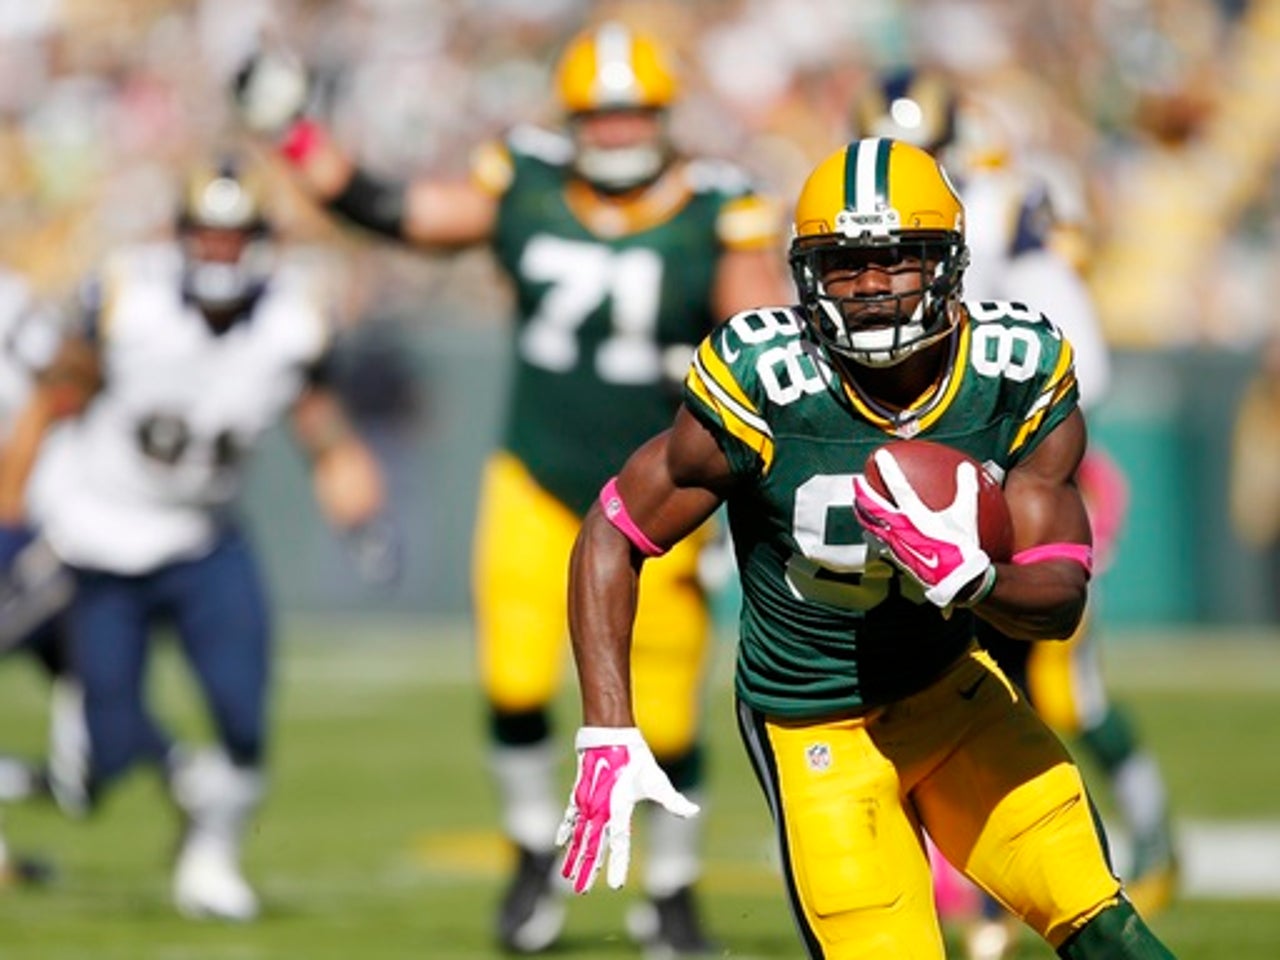 Packers: Eddie Lacy limited in practice due to bruised hip